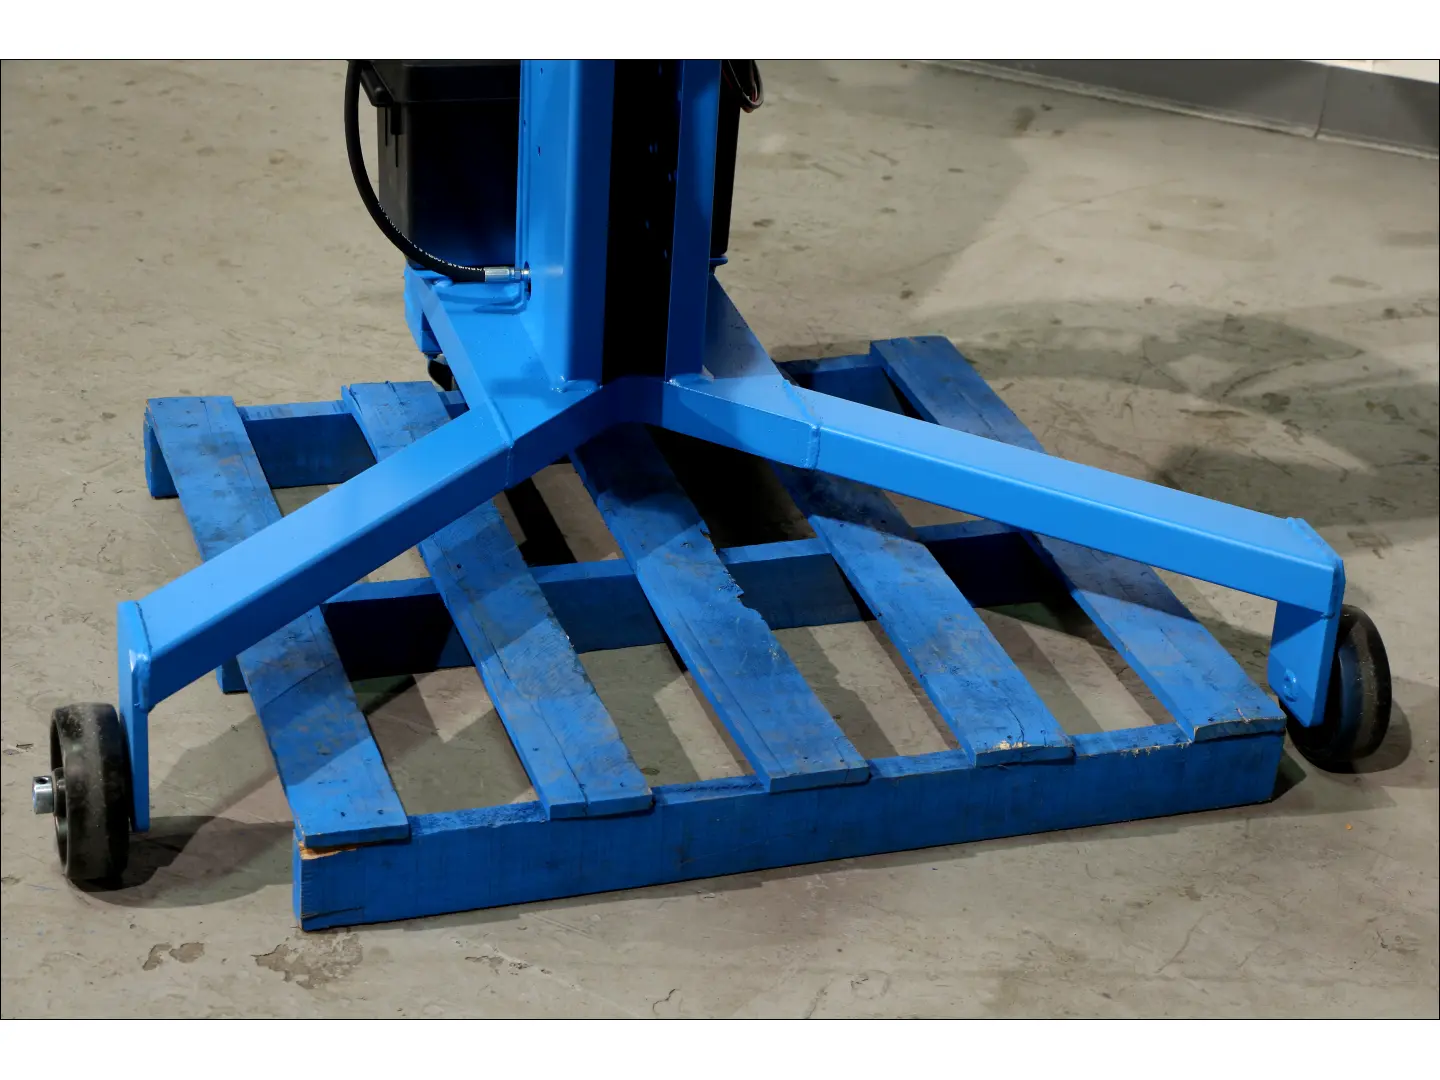 82 Series Base spans a pallet up to 41" (104 cm) wide and 7" (18 cm) tall